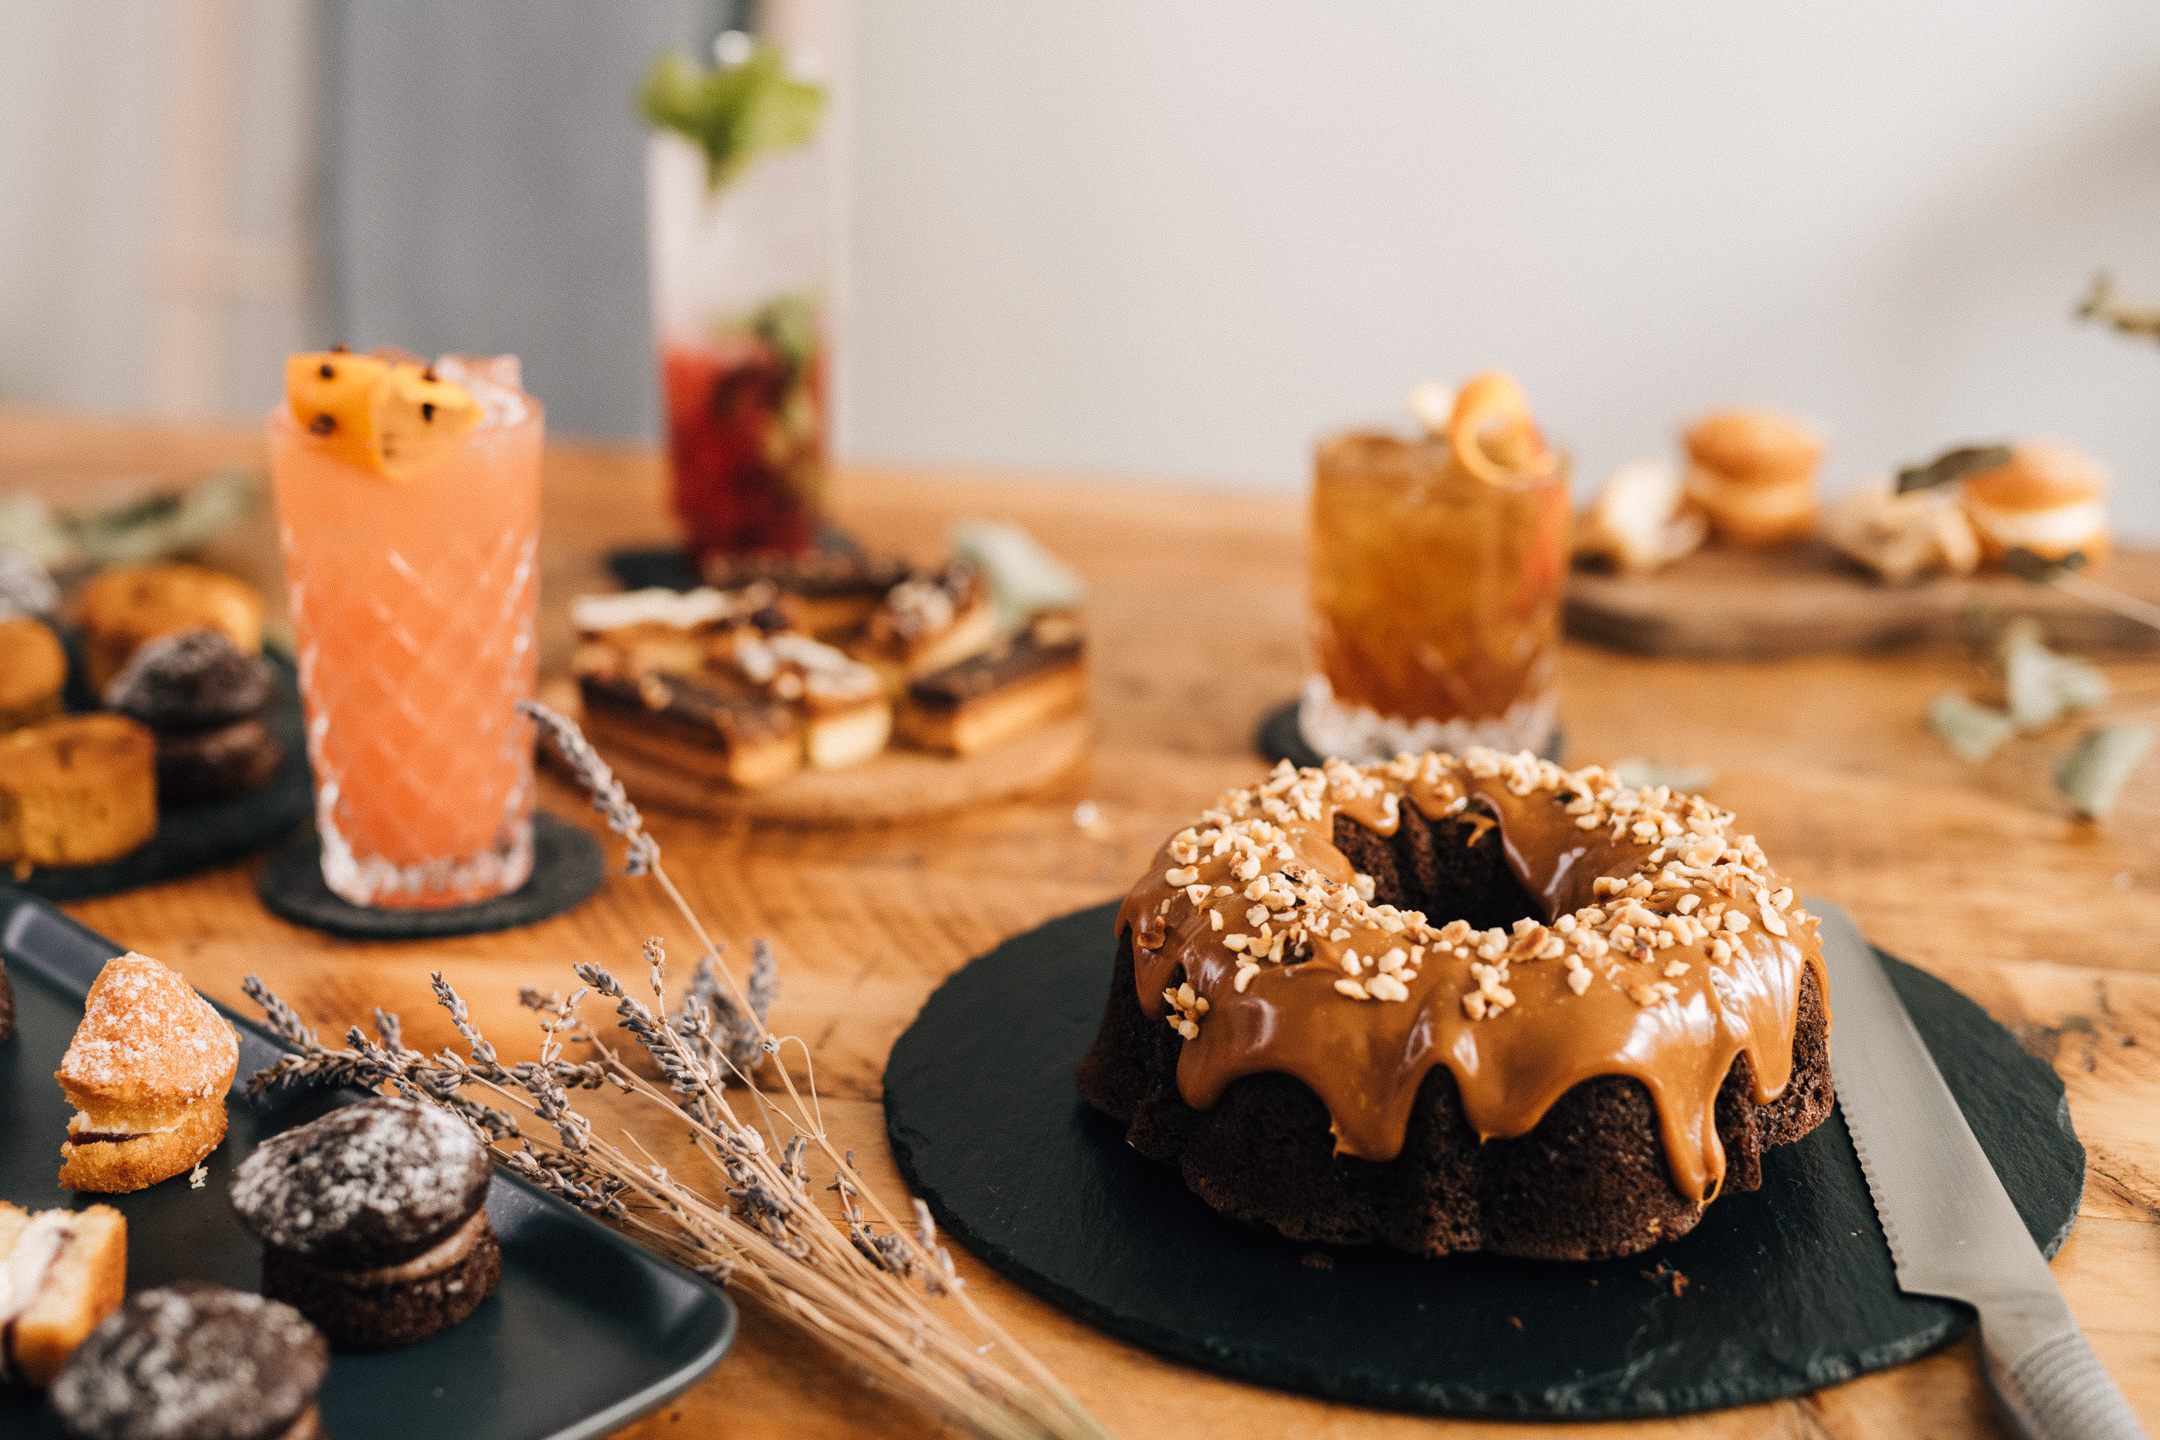 SPAR launches traditional Christmas bakes in collaboration with local bakery